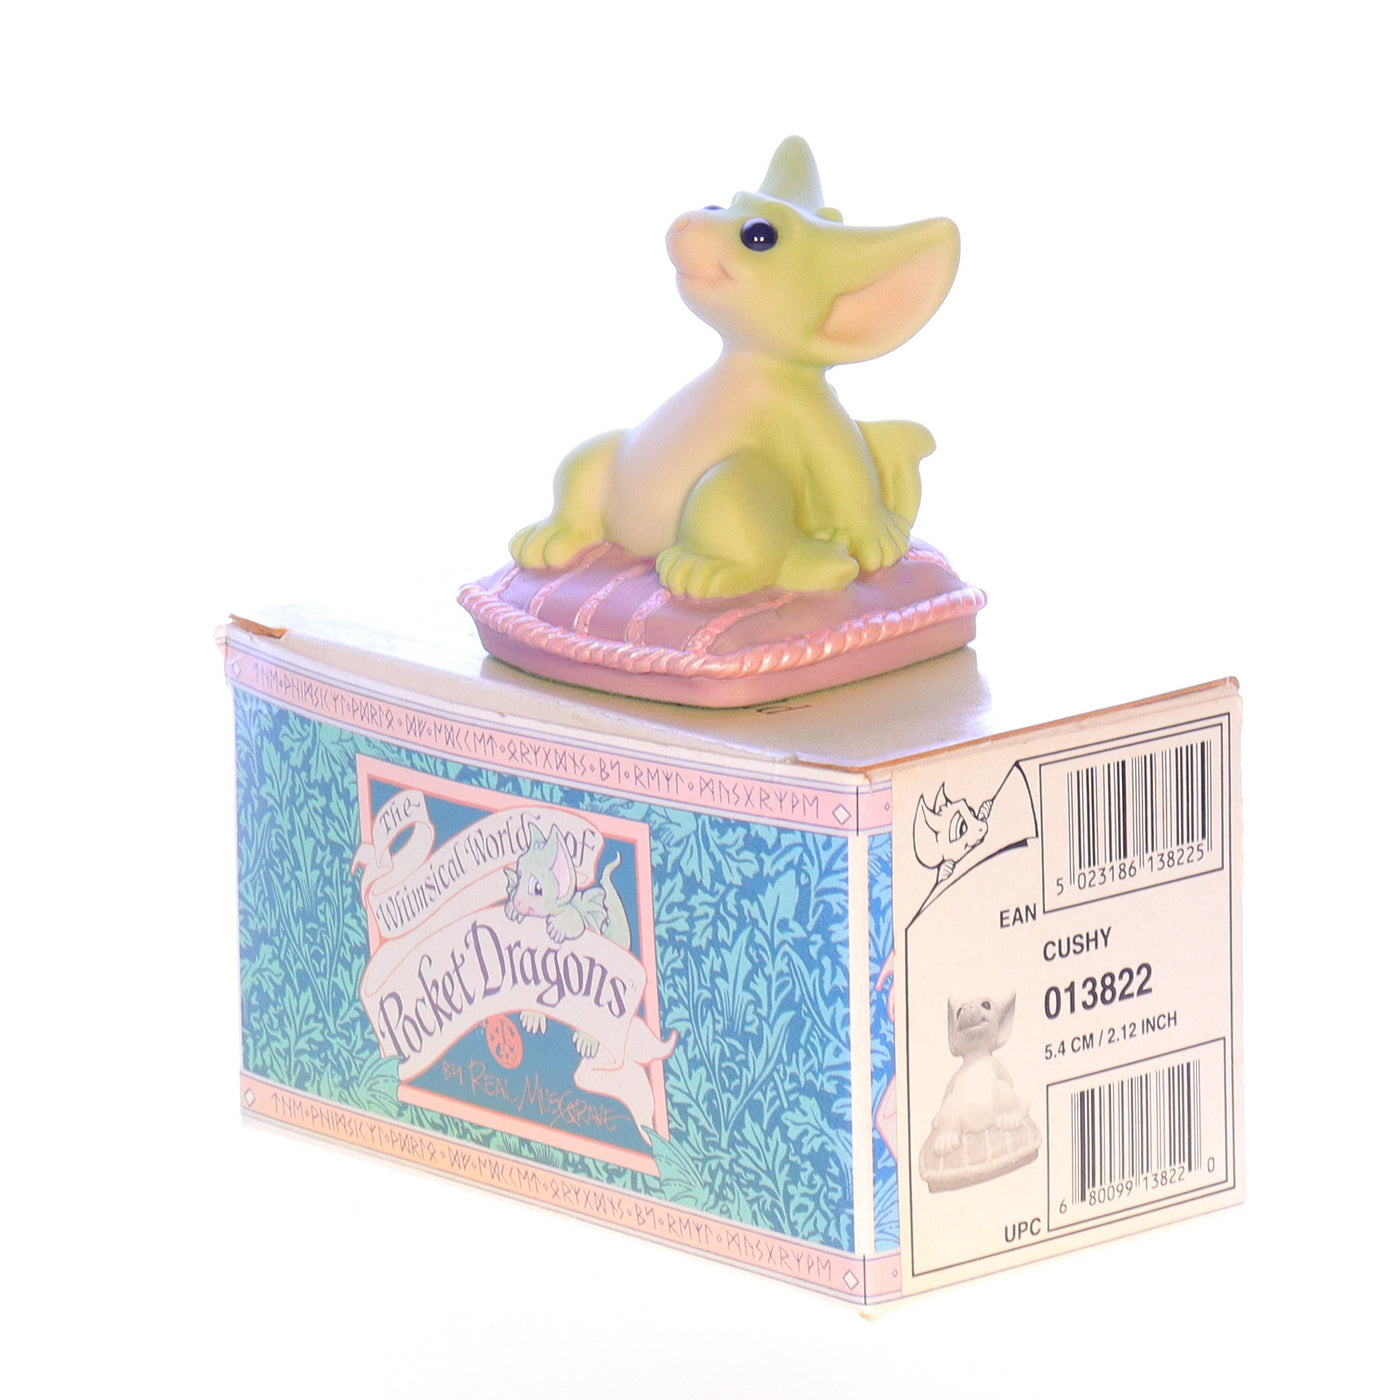 Whimsical_World_of_Pocket_Dragons_013822_Cushy_Fantasy_Figurine_2001_Box Front Left View